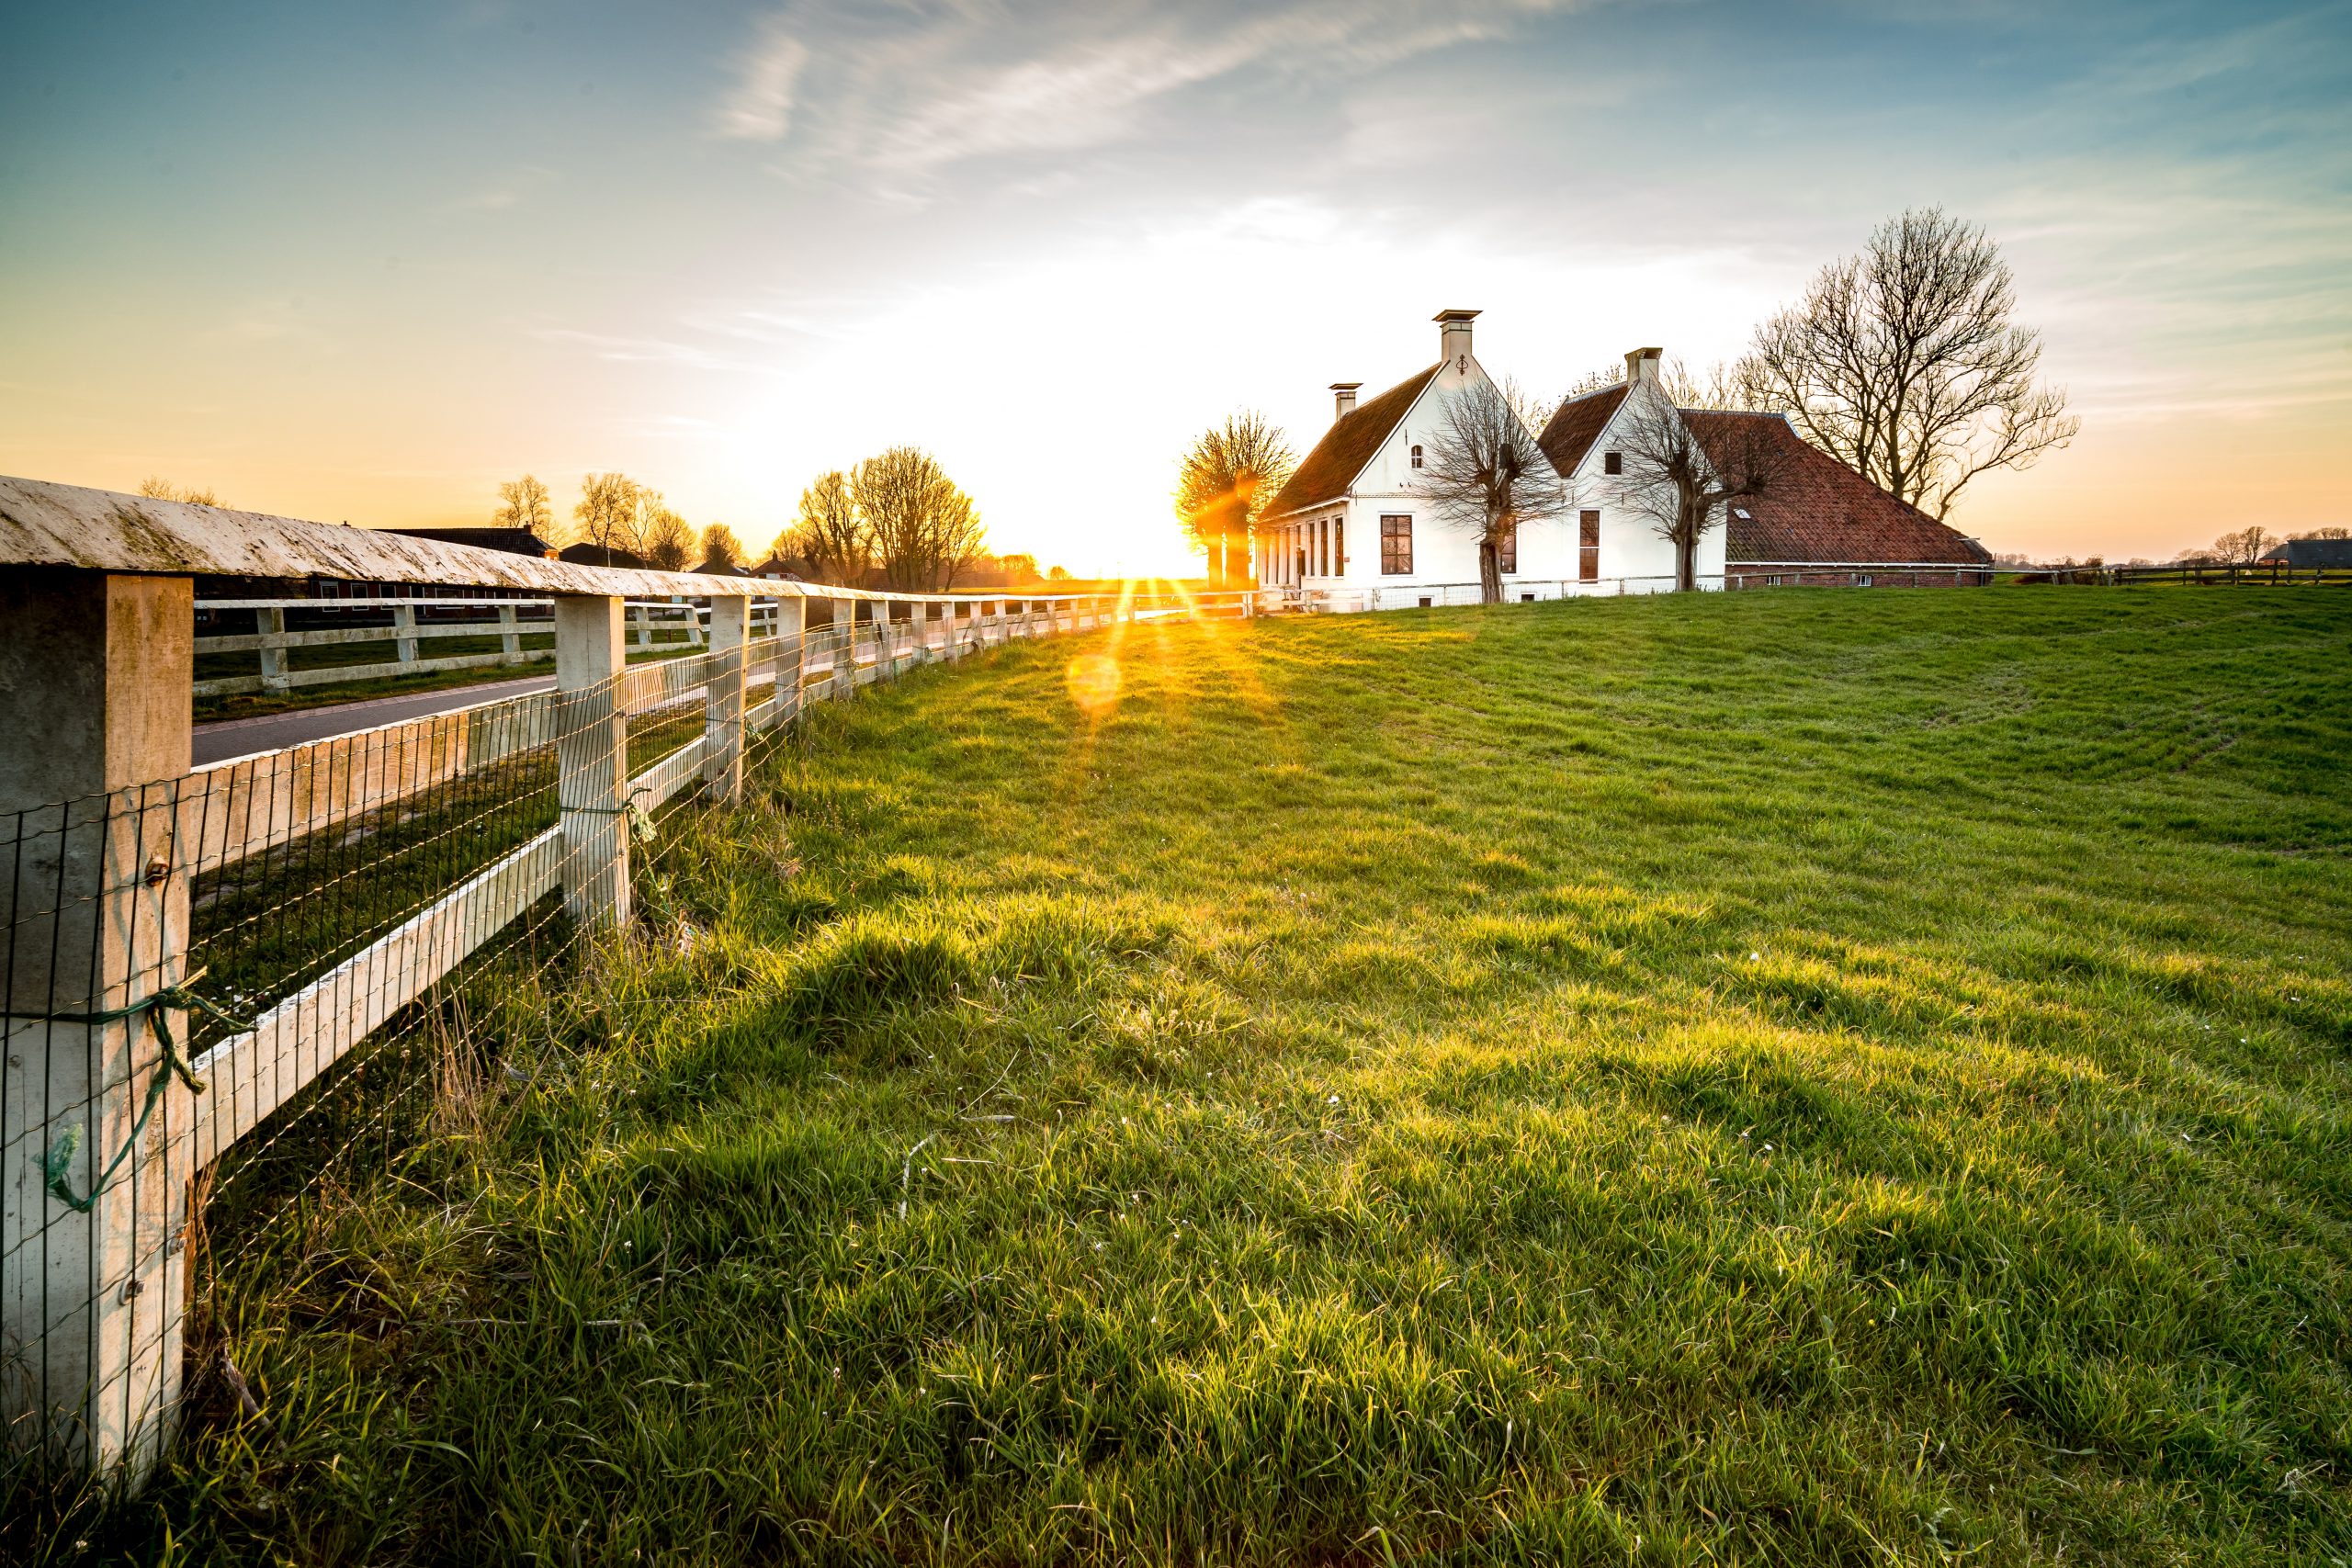 Beautiful shot of a fence leading to a house in a green grass area